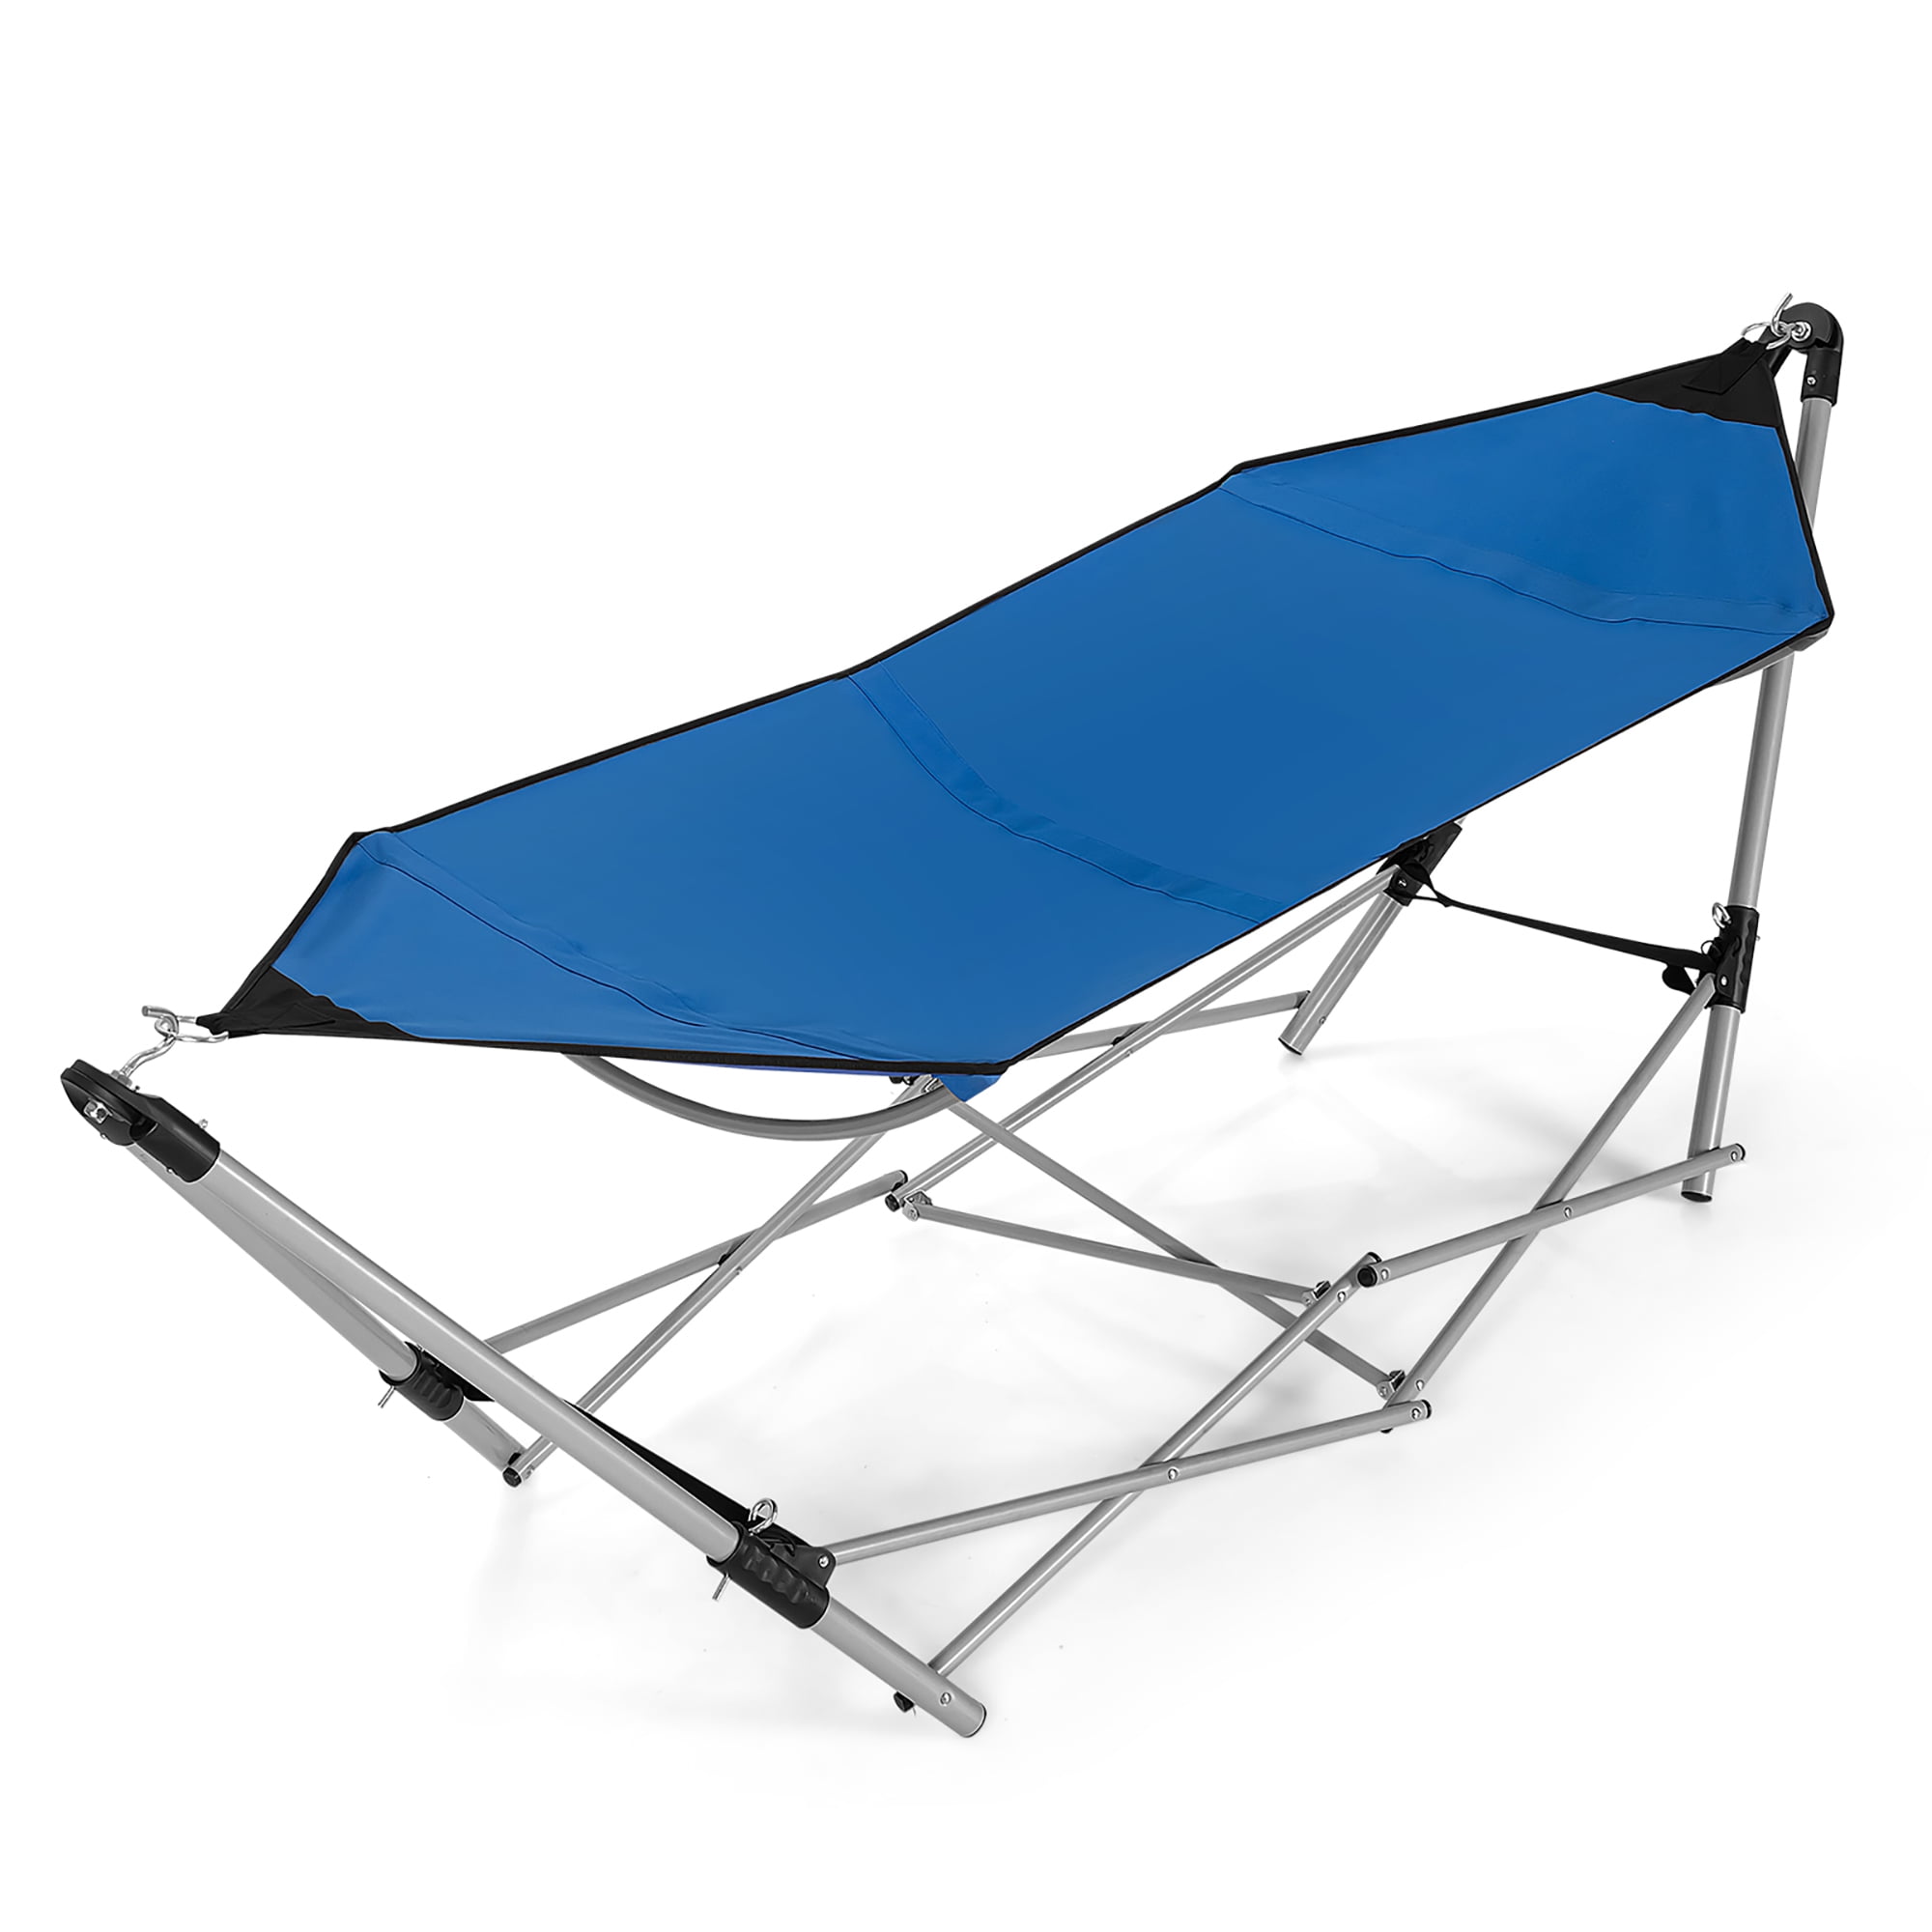 Hammock with Stand Patio Garden Deck Pool Camping Black Steel Frame Portable Bed 